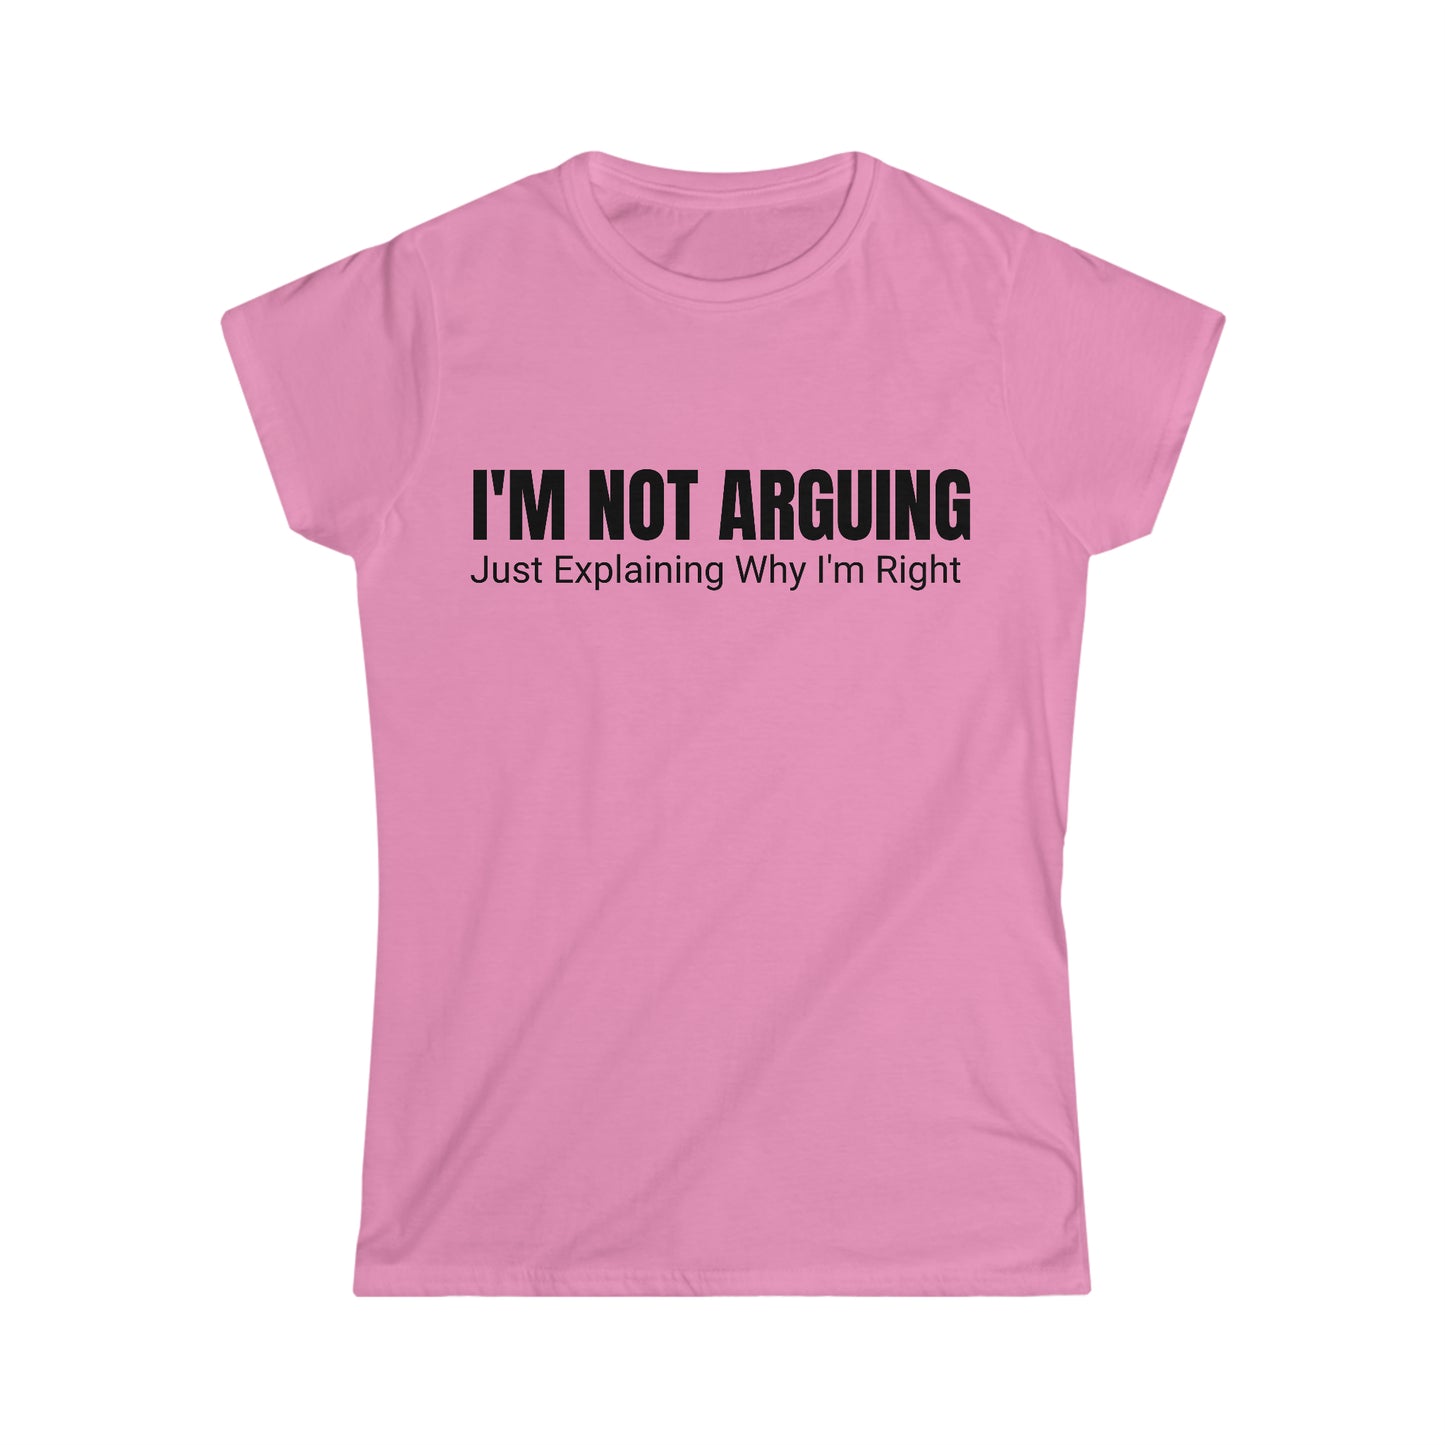 Women Apparel (I'm Not Arguing/ Women's Softstyle Tee)